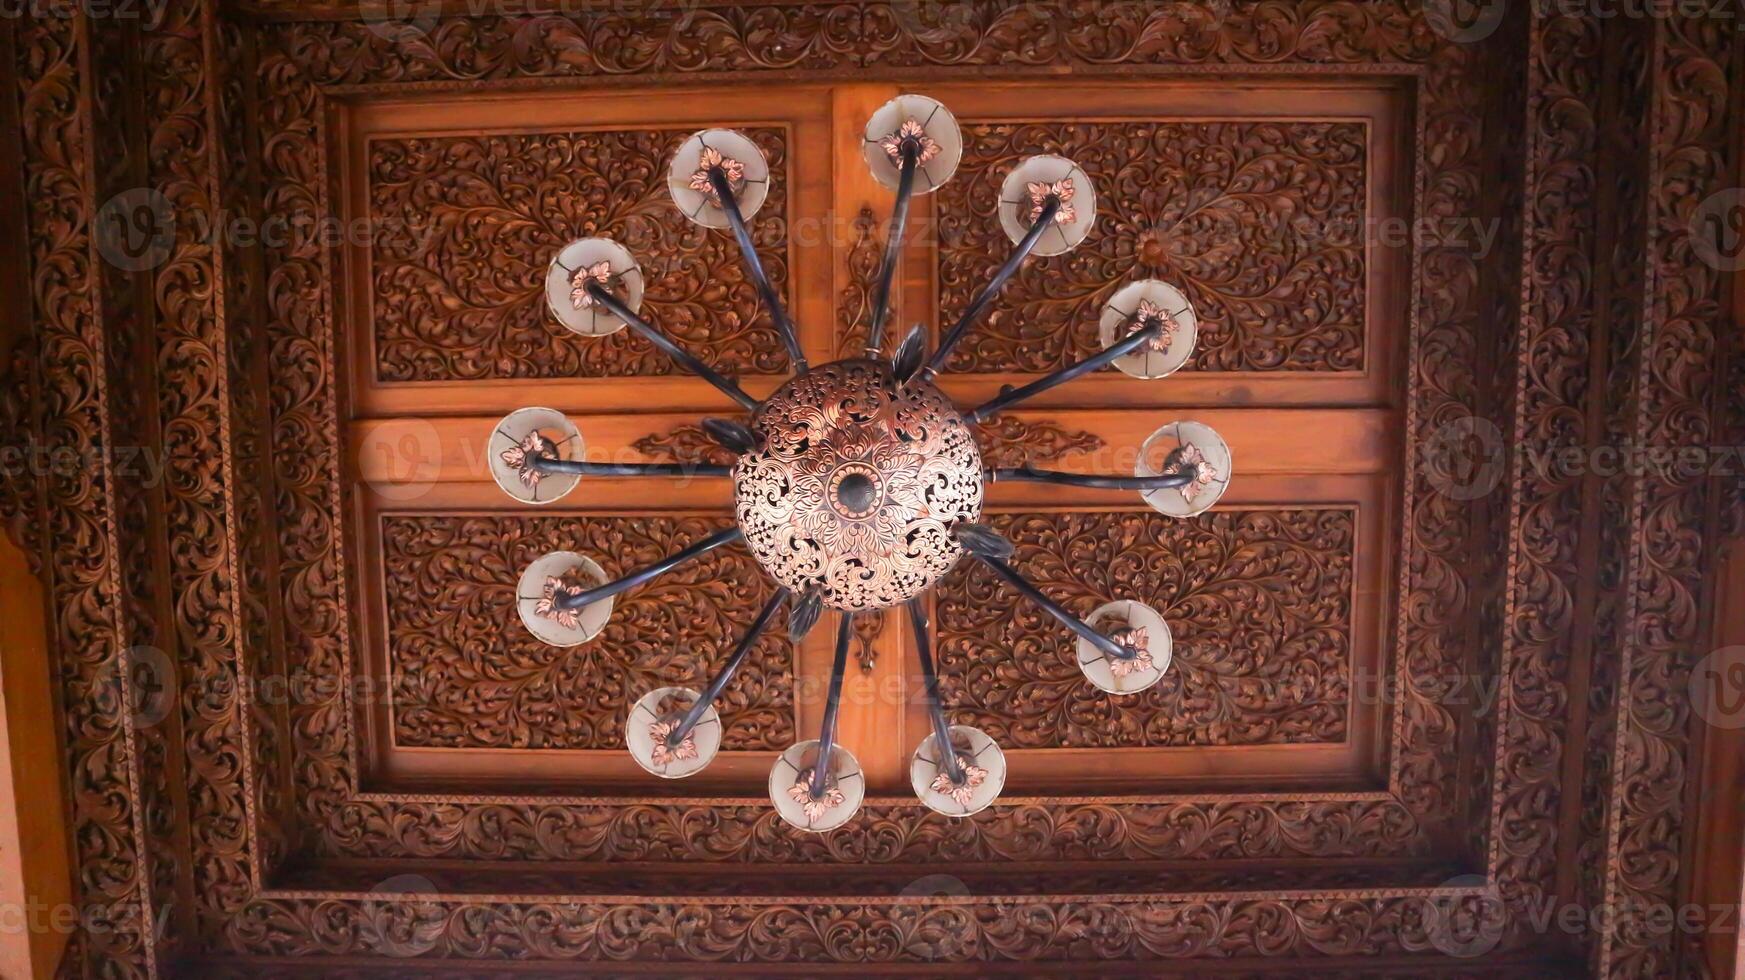 Beautiful retro chandelier on wood carving ceiling in traditional javanese house interior. photo